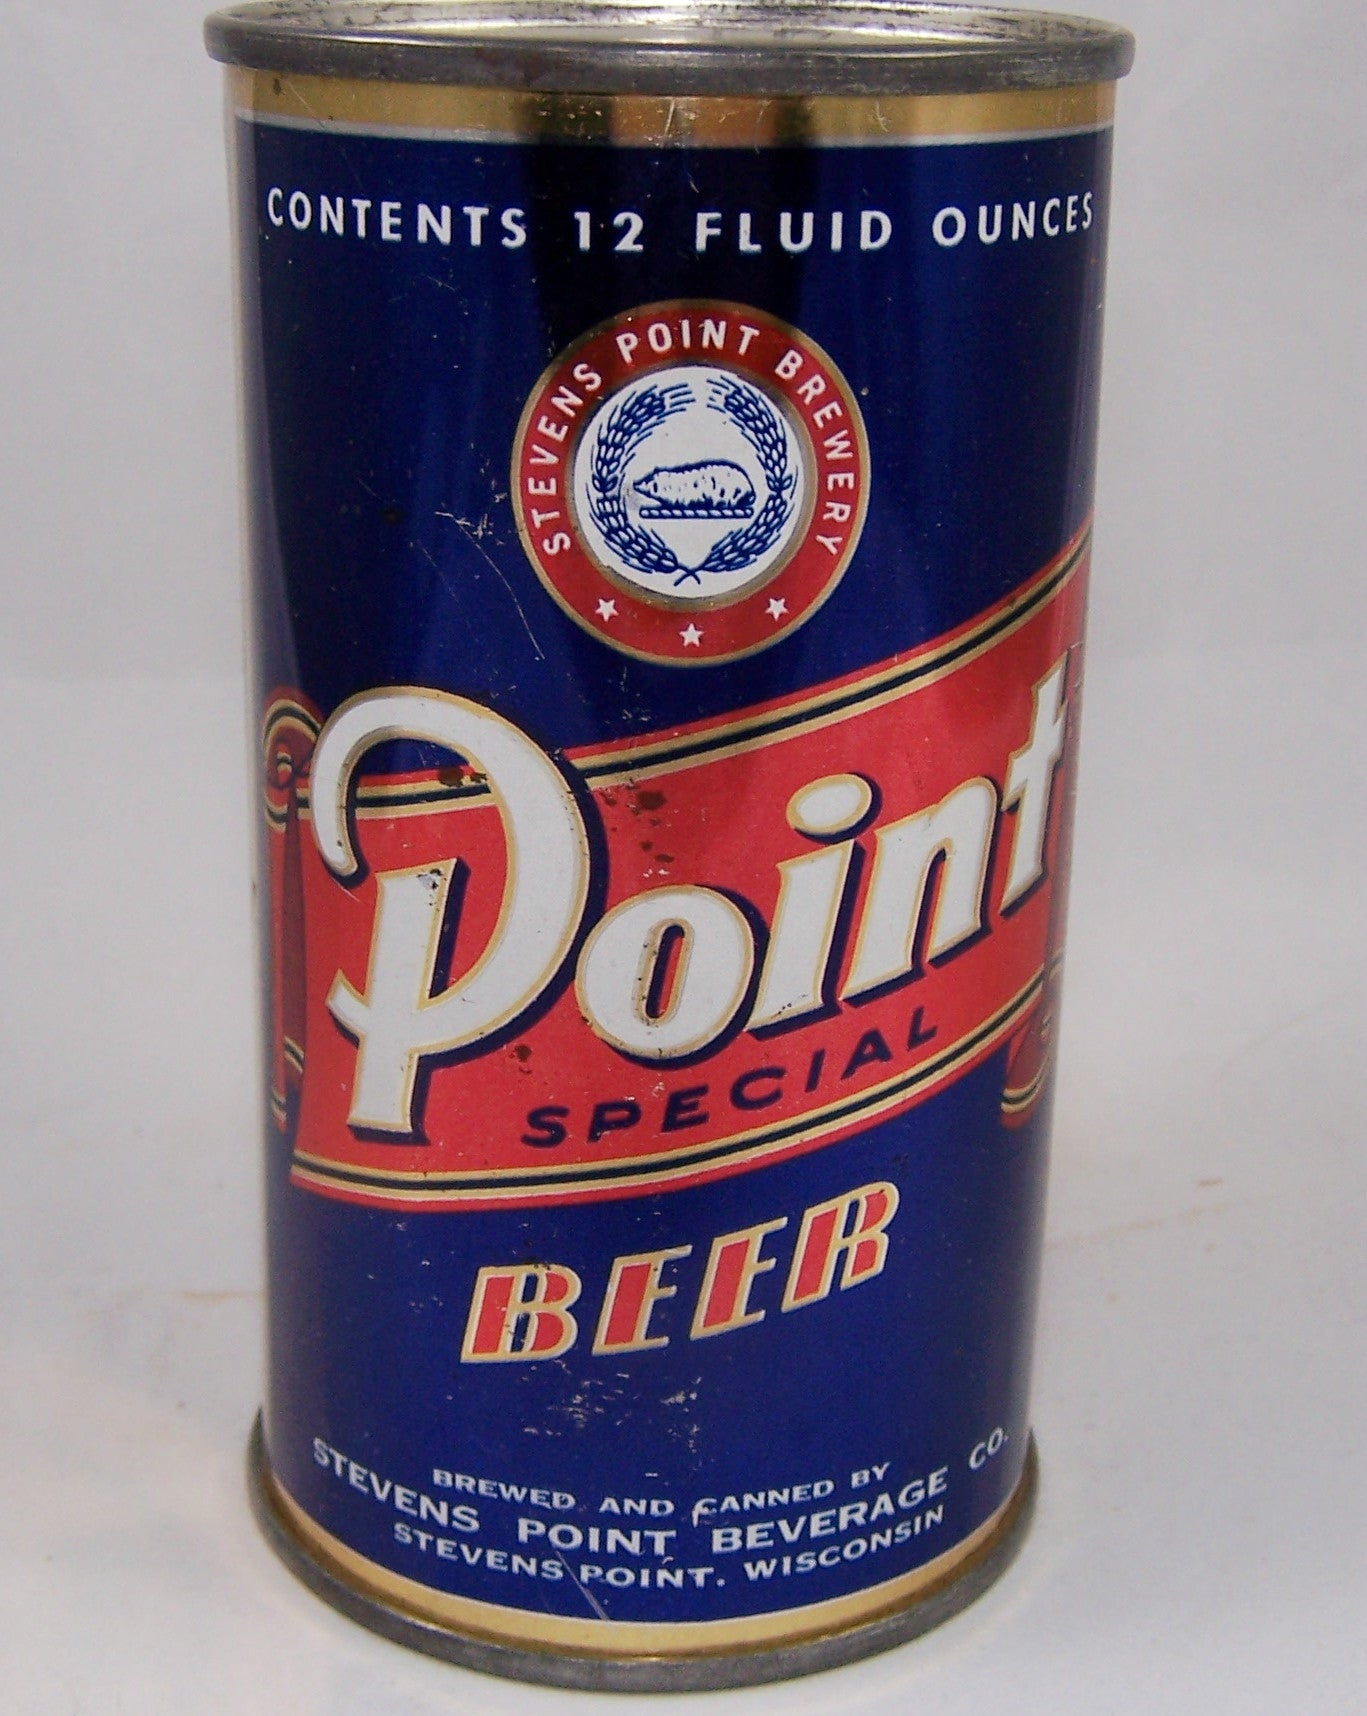 Point Special Beer, USBC 116-18 (ROLLED) Grade 1/1- sold on 04/16/16